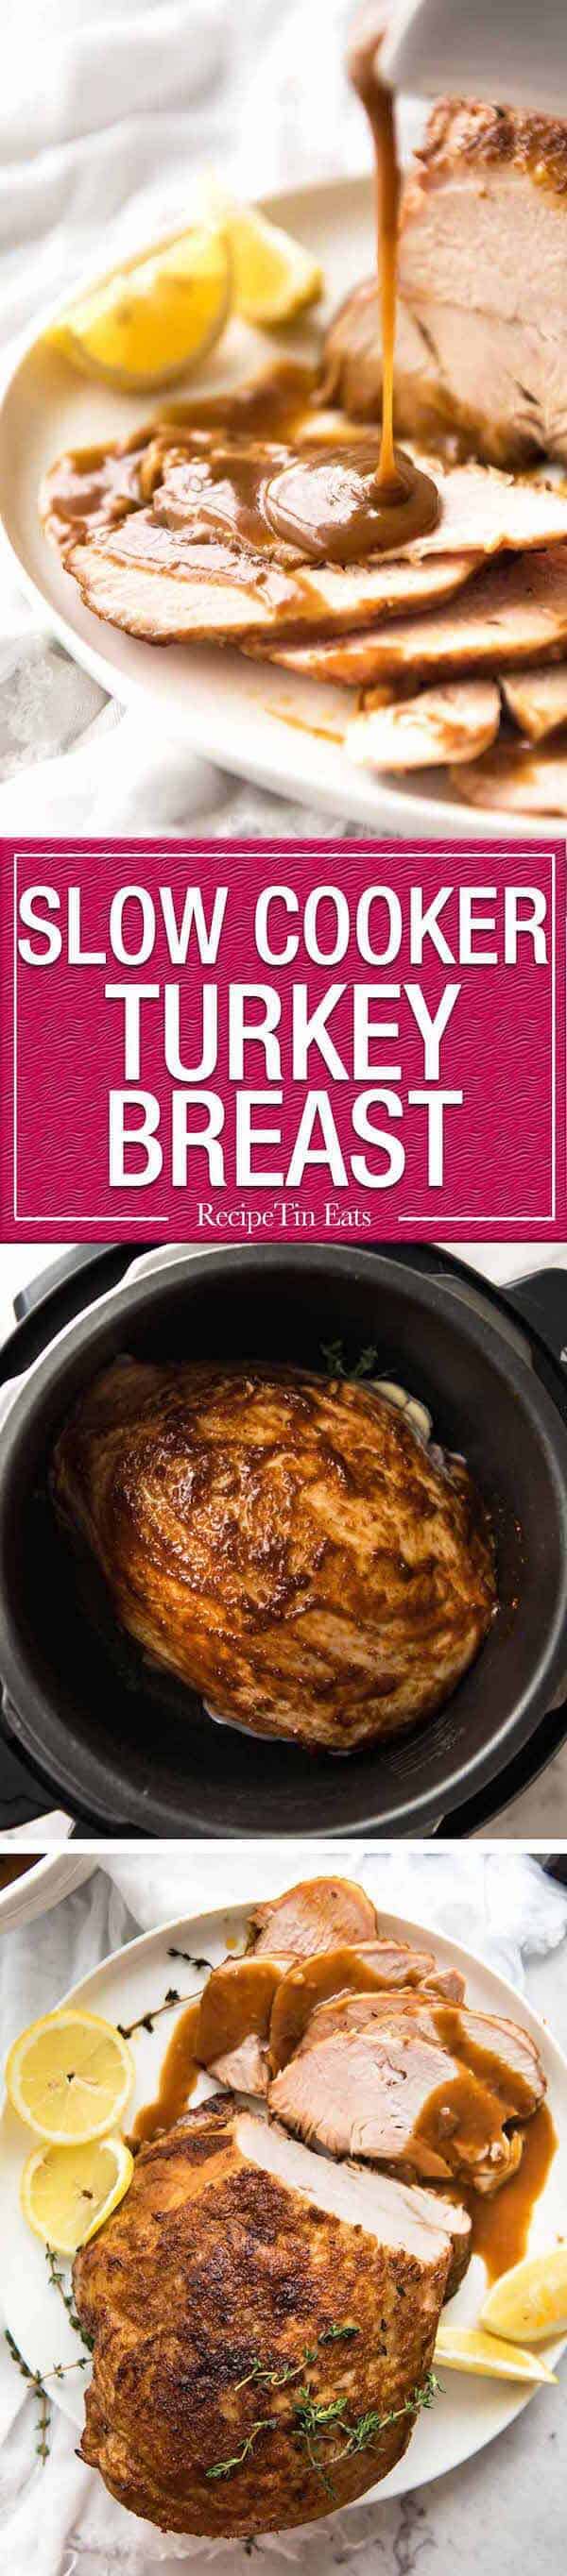 Slow Cooker Turkey Breast with Gravy - the easiest and safest way to make juicy turkey breast without brining! recipetineats.com